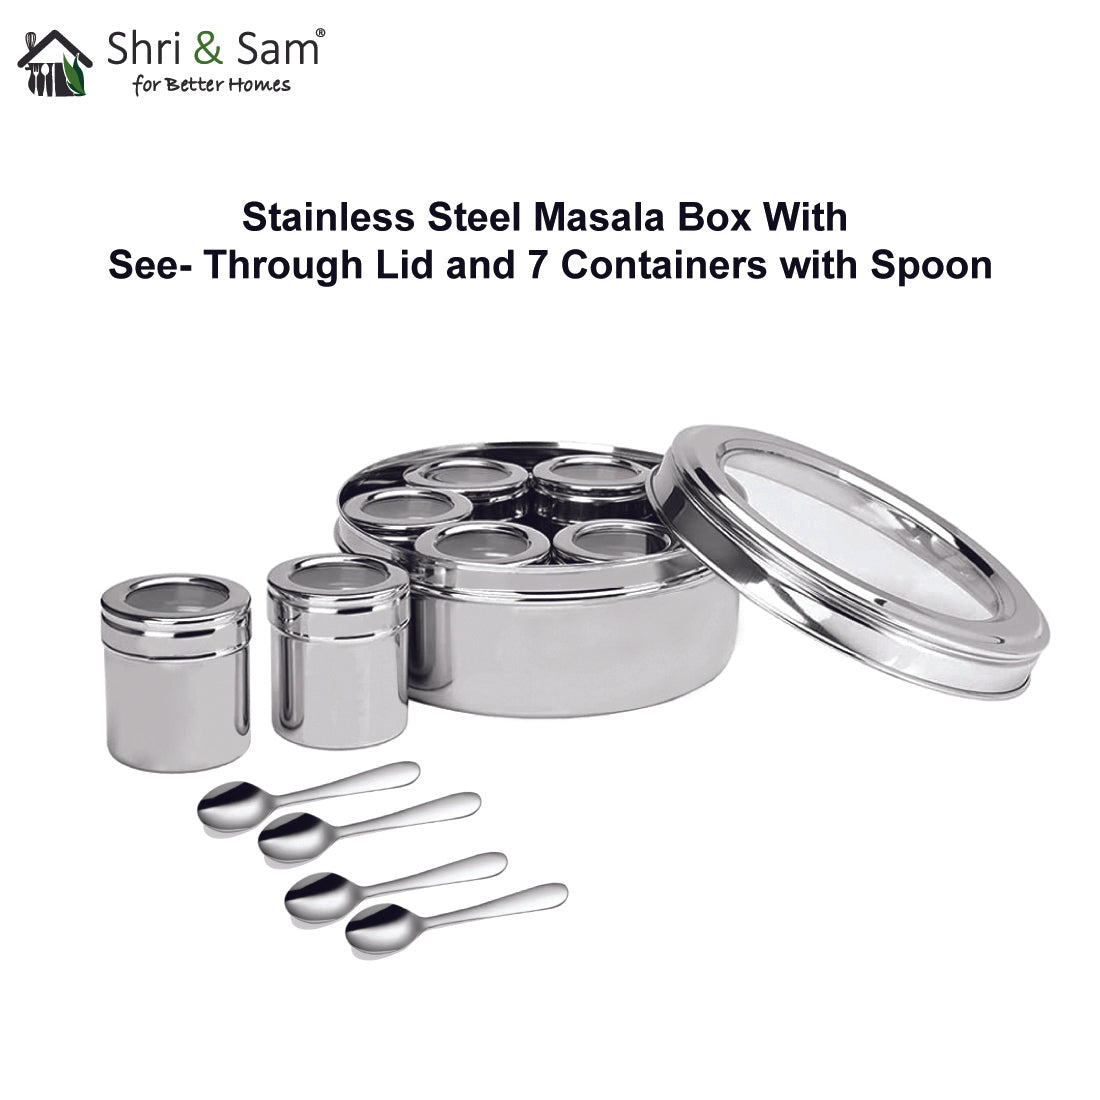 Stainless Steel Masala Box with See Through Lid and 7 Containers with Spoon